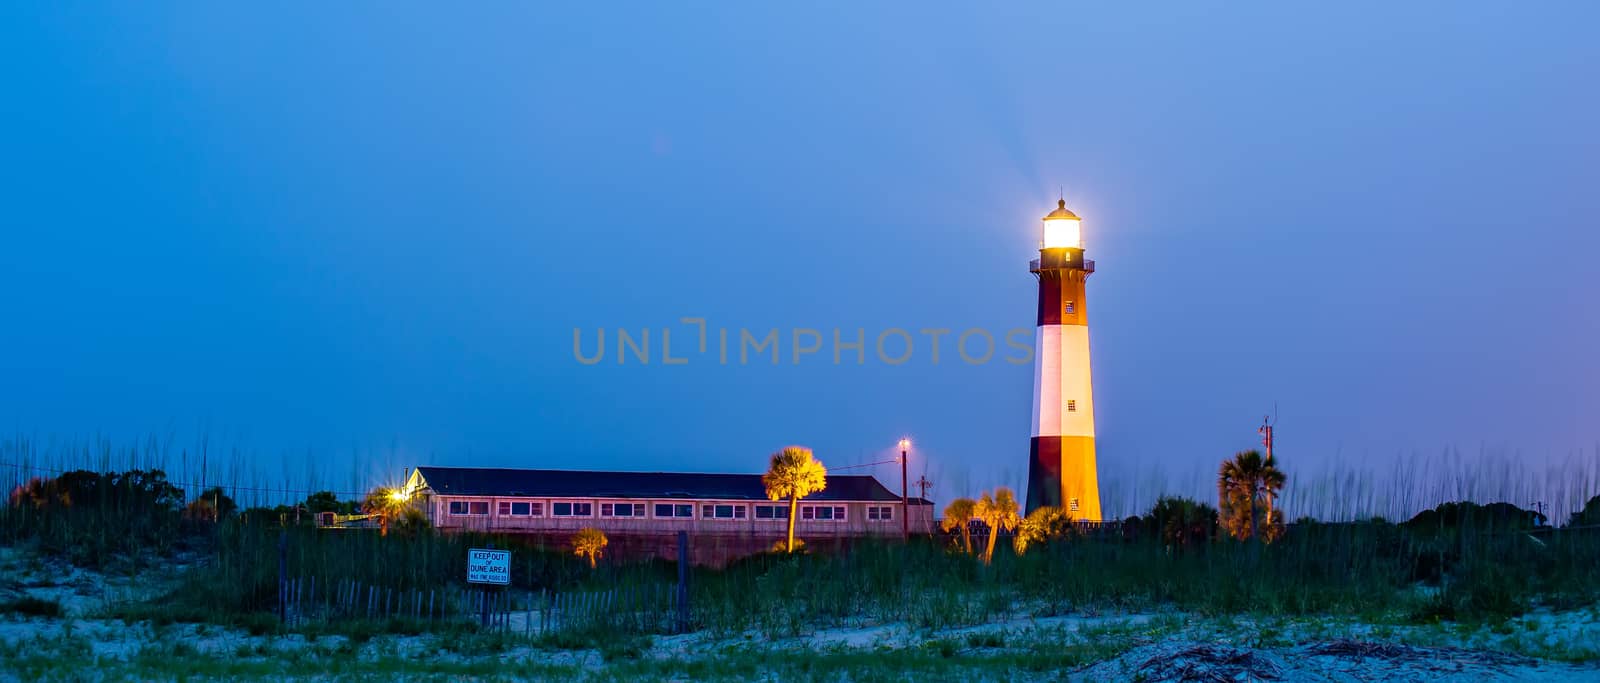 Tybee Island Light with storm approaching by digidreamgrafix